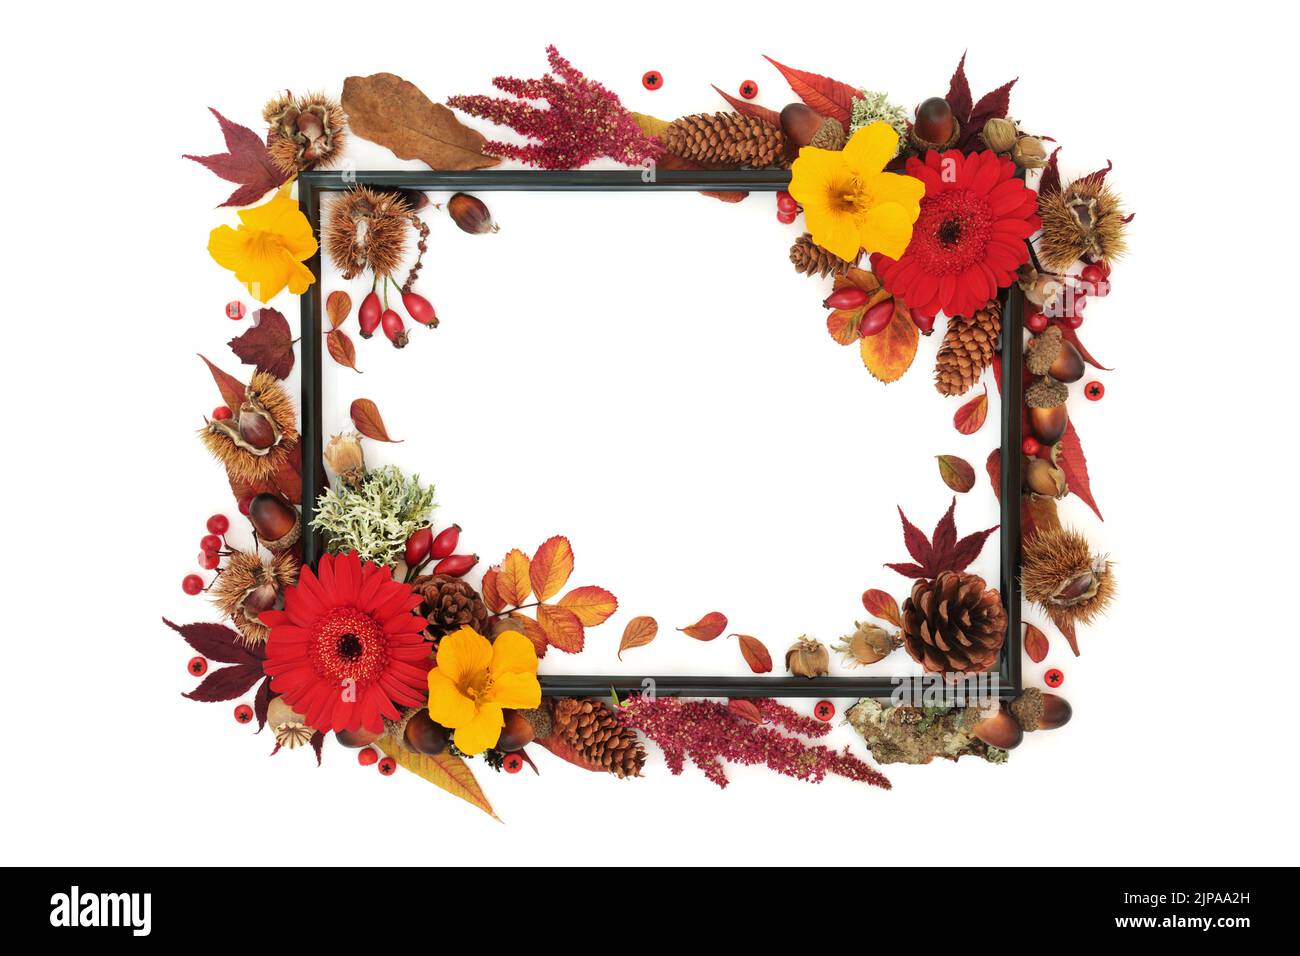 Symbols of Autumn season abstract background frame. Nature concept with leavers, flowers, nuts, berry fruit. Thanksgiving Fall composition with natura Stock Photo